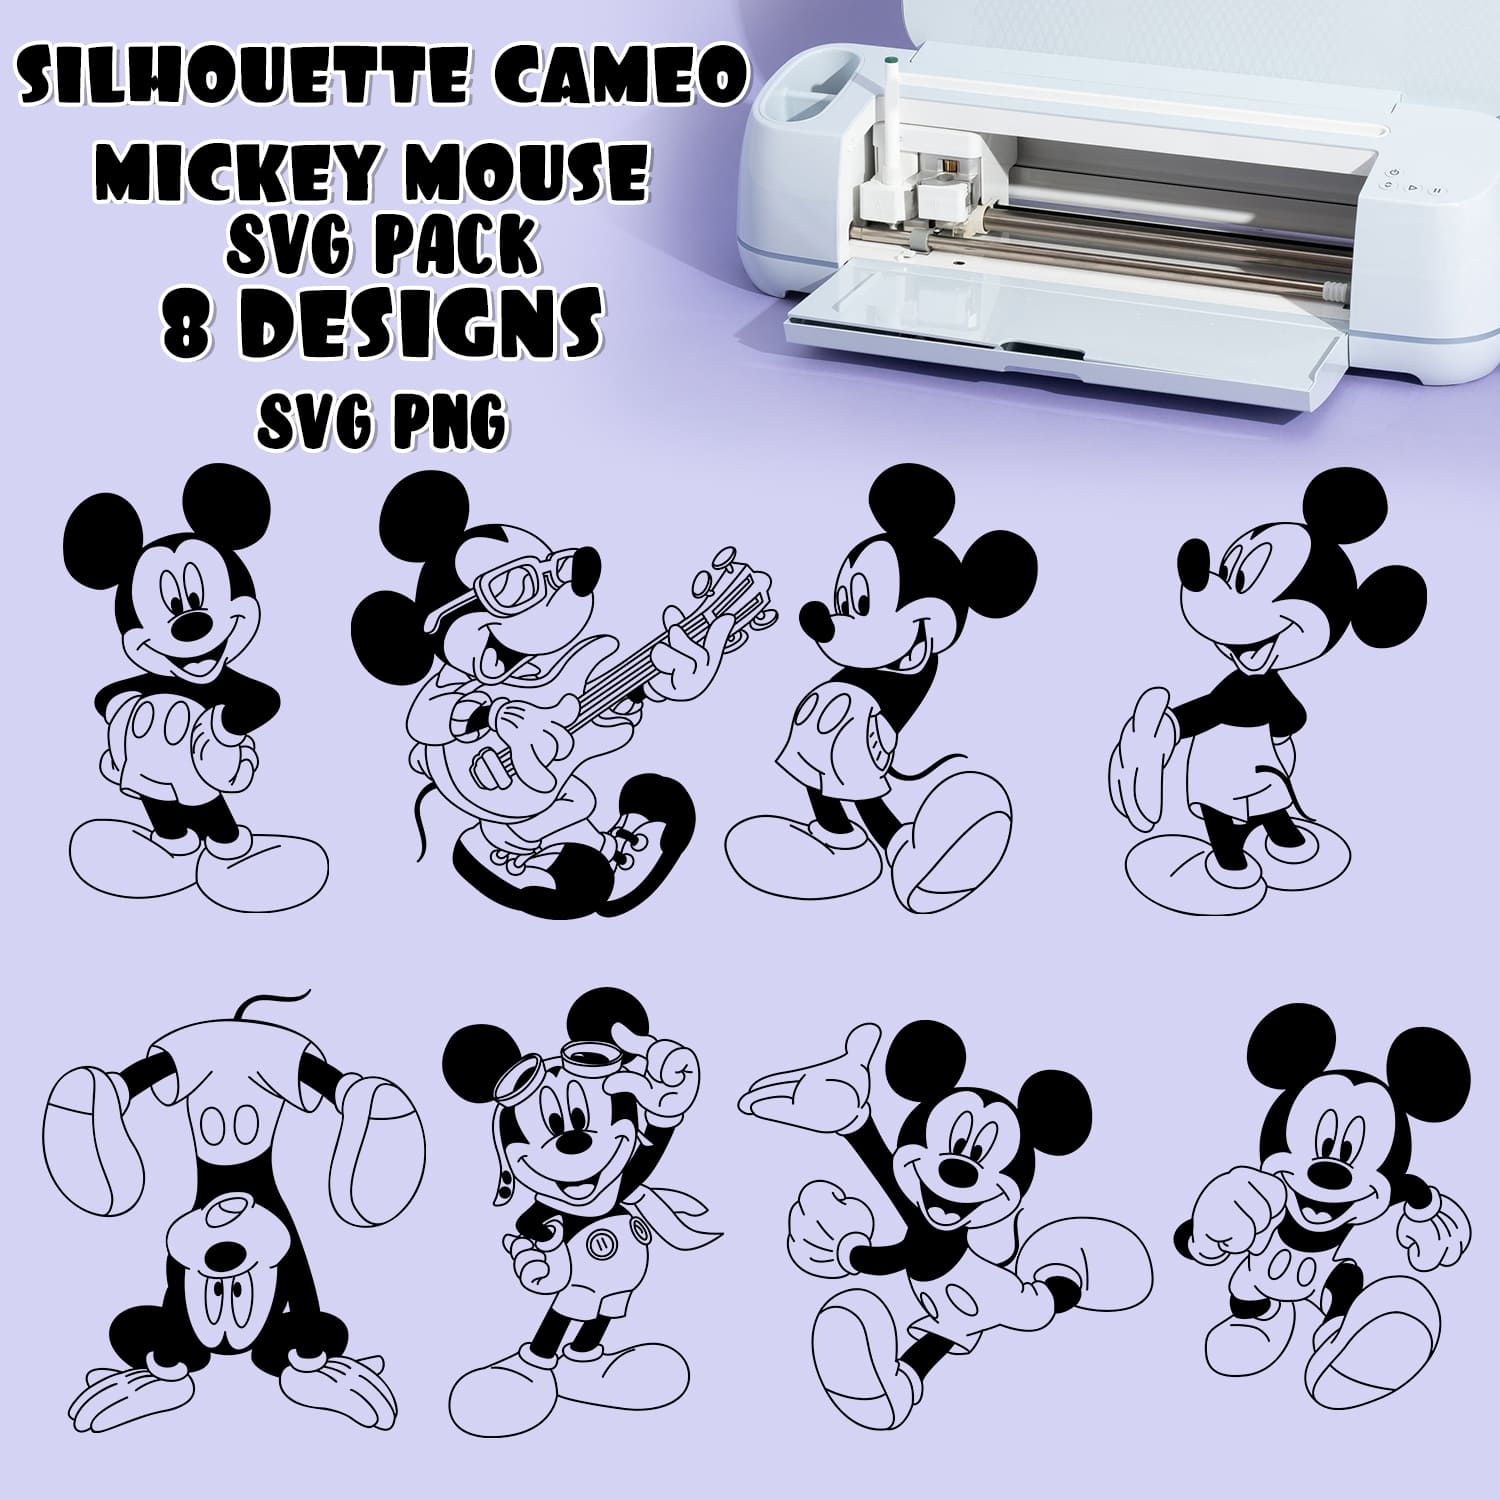 Silhouette Cameo Mickey Mouse SVG - main image preview.